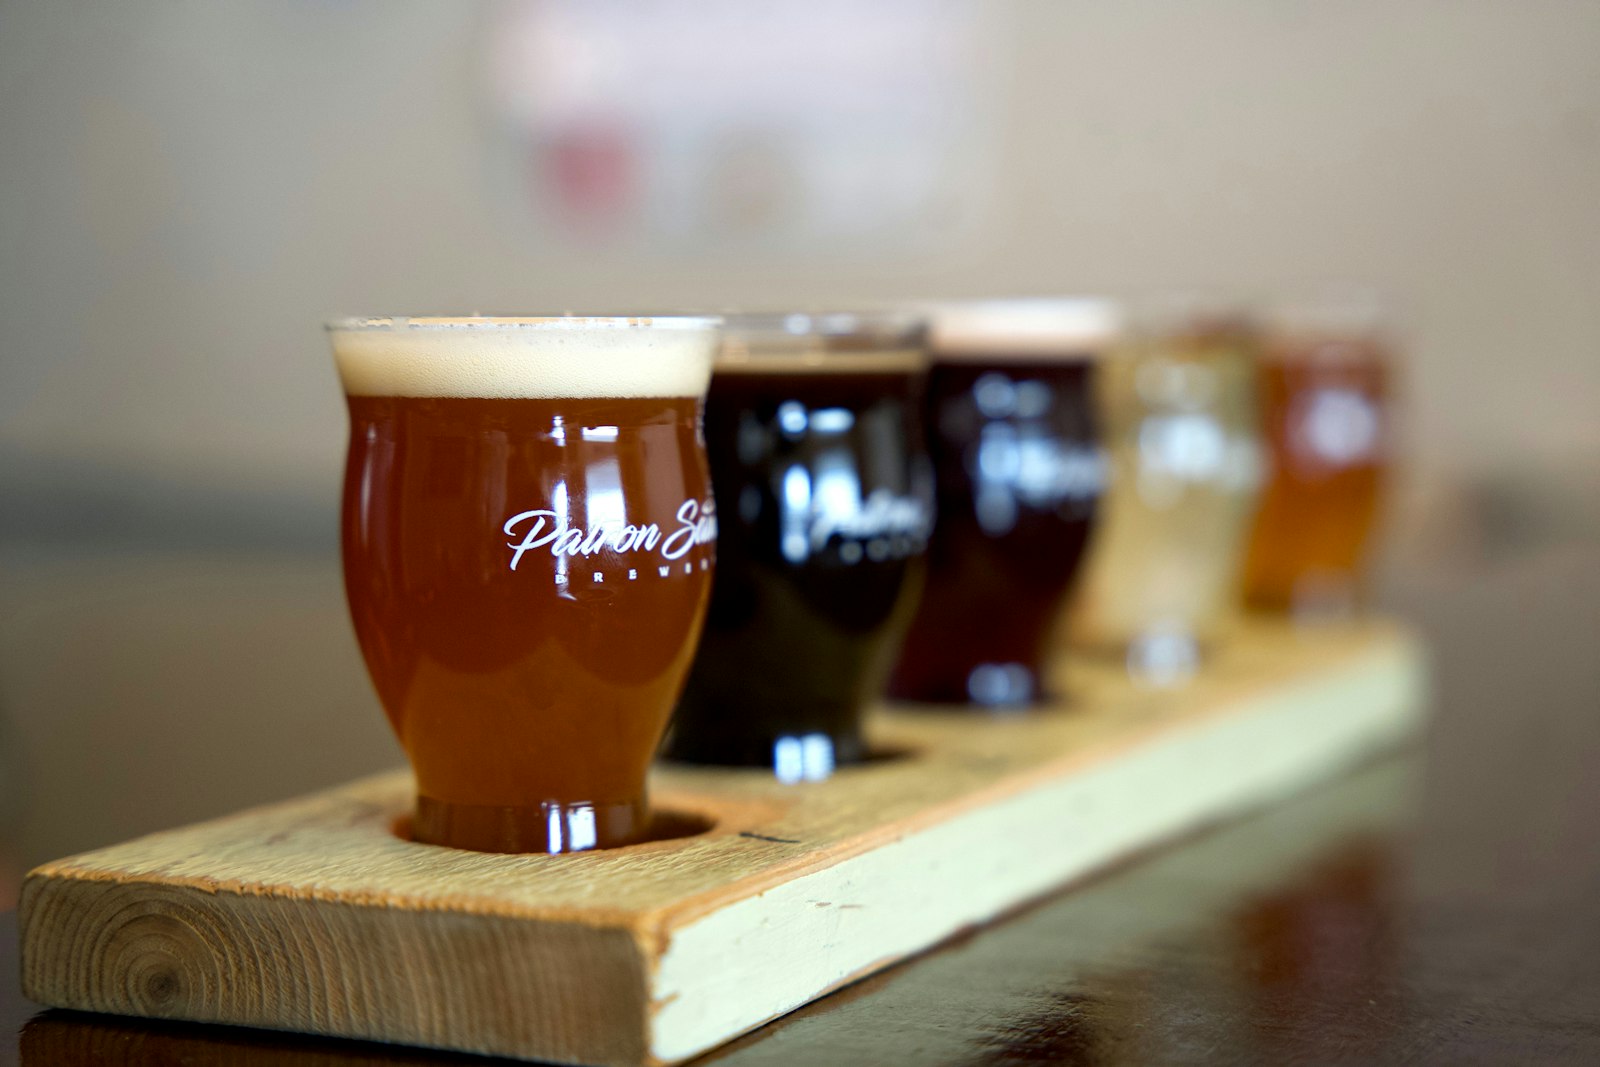 In addition to the Gospel flight, customers can order a pint of St. Ursula and St. Francis – named after two local Catholic schools. The brewery offers a rotating selection of beers throughout the year, sometimes inspired by the season.